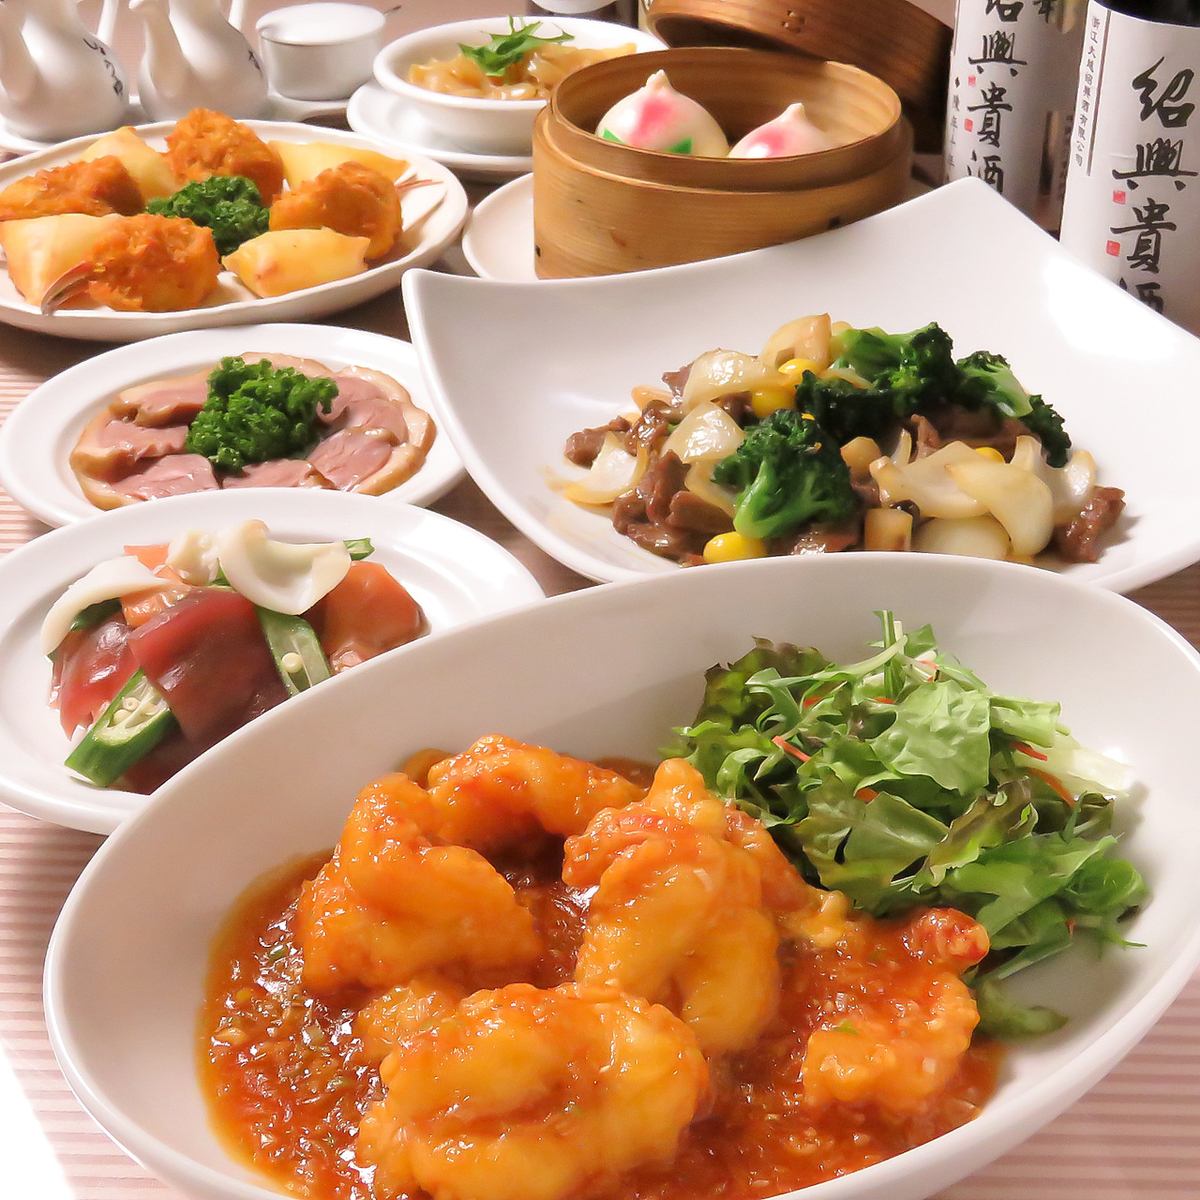 A local Chinese restaurant loved by Gamagori! Enjoy with your family and friends.